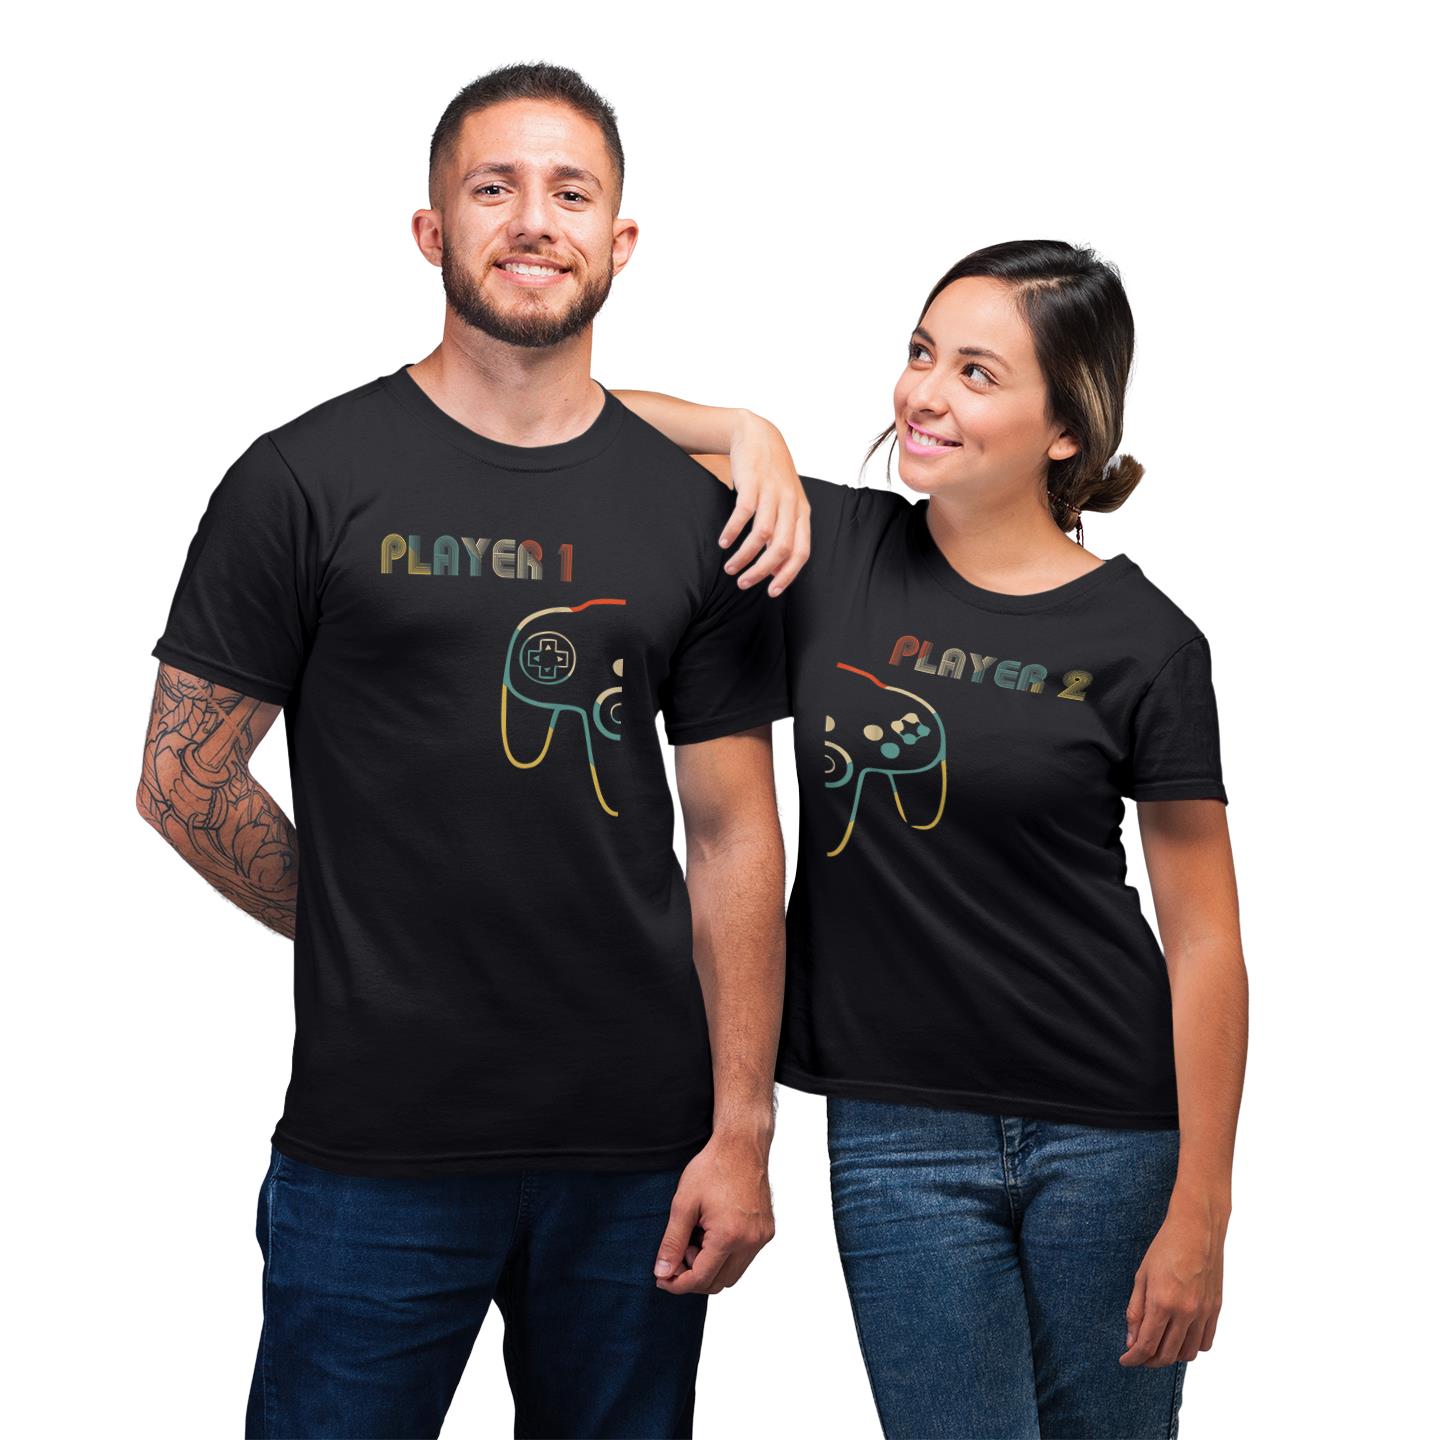 Gamer Dual Player Couple Funny Gift T-shirt